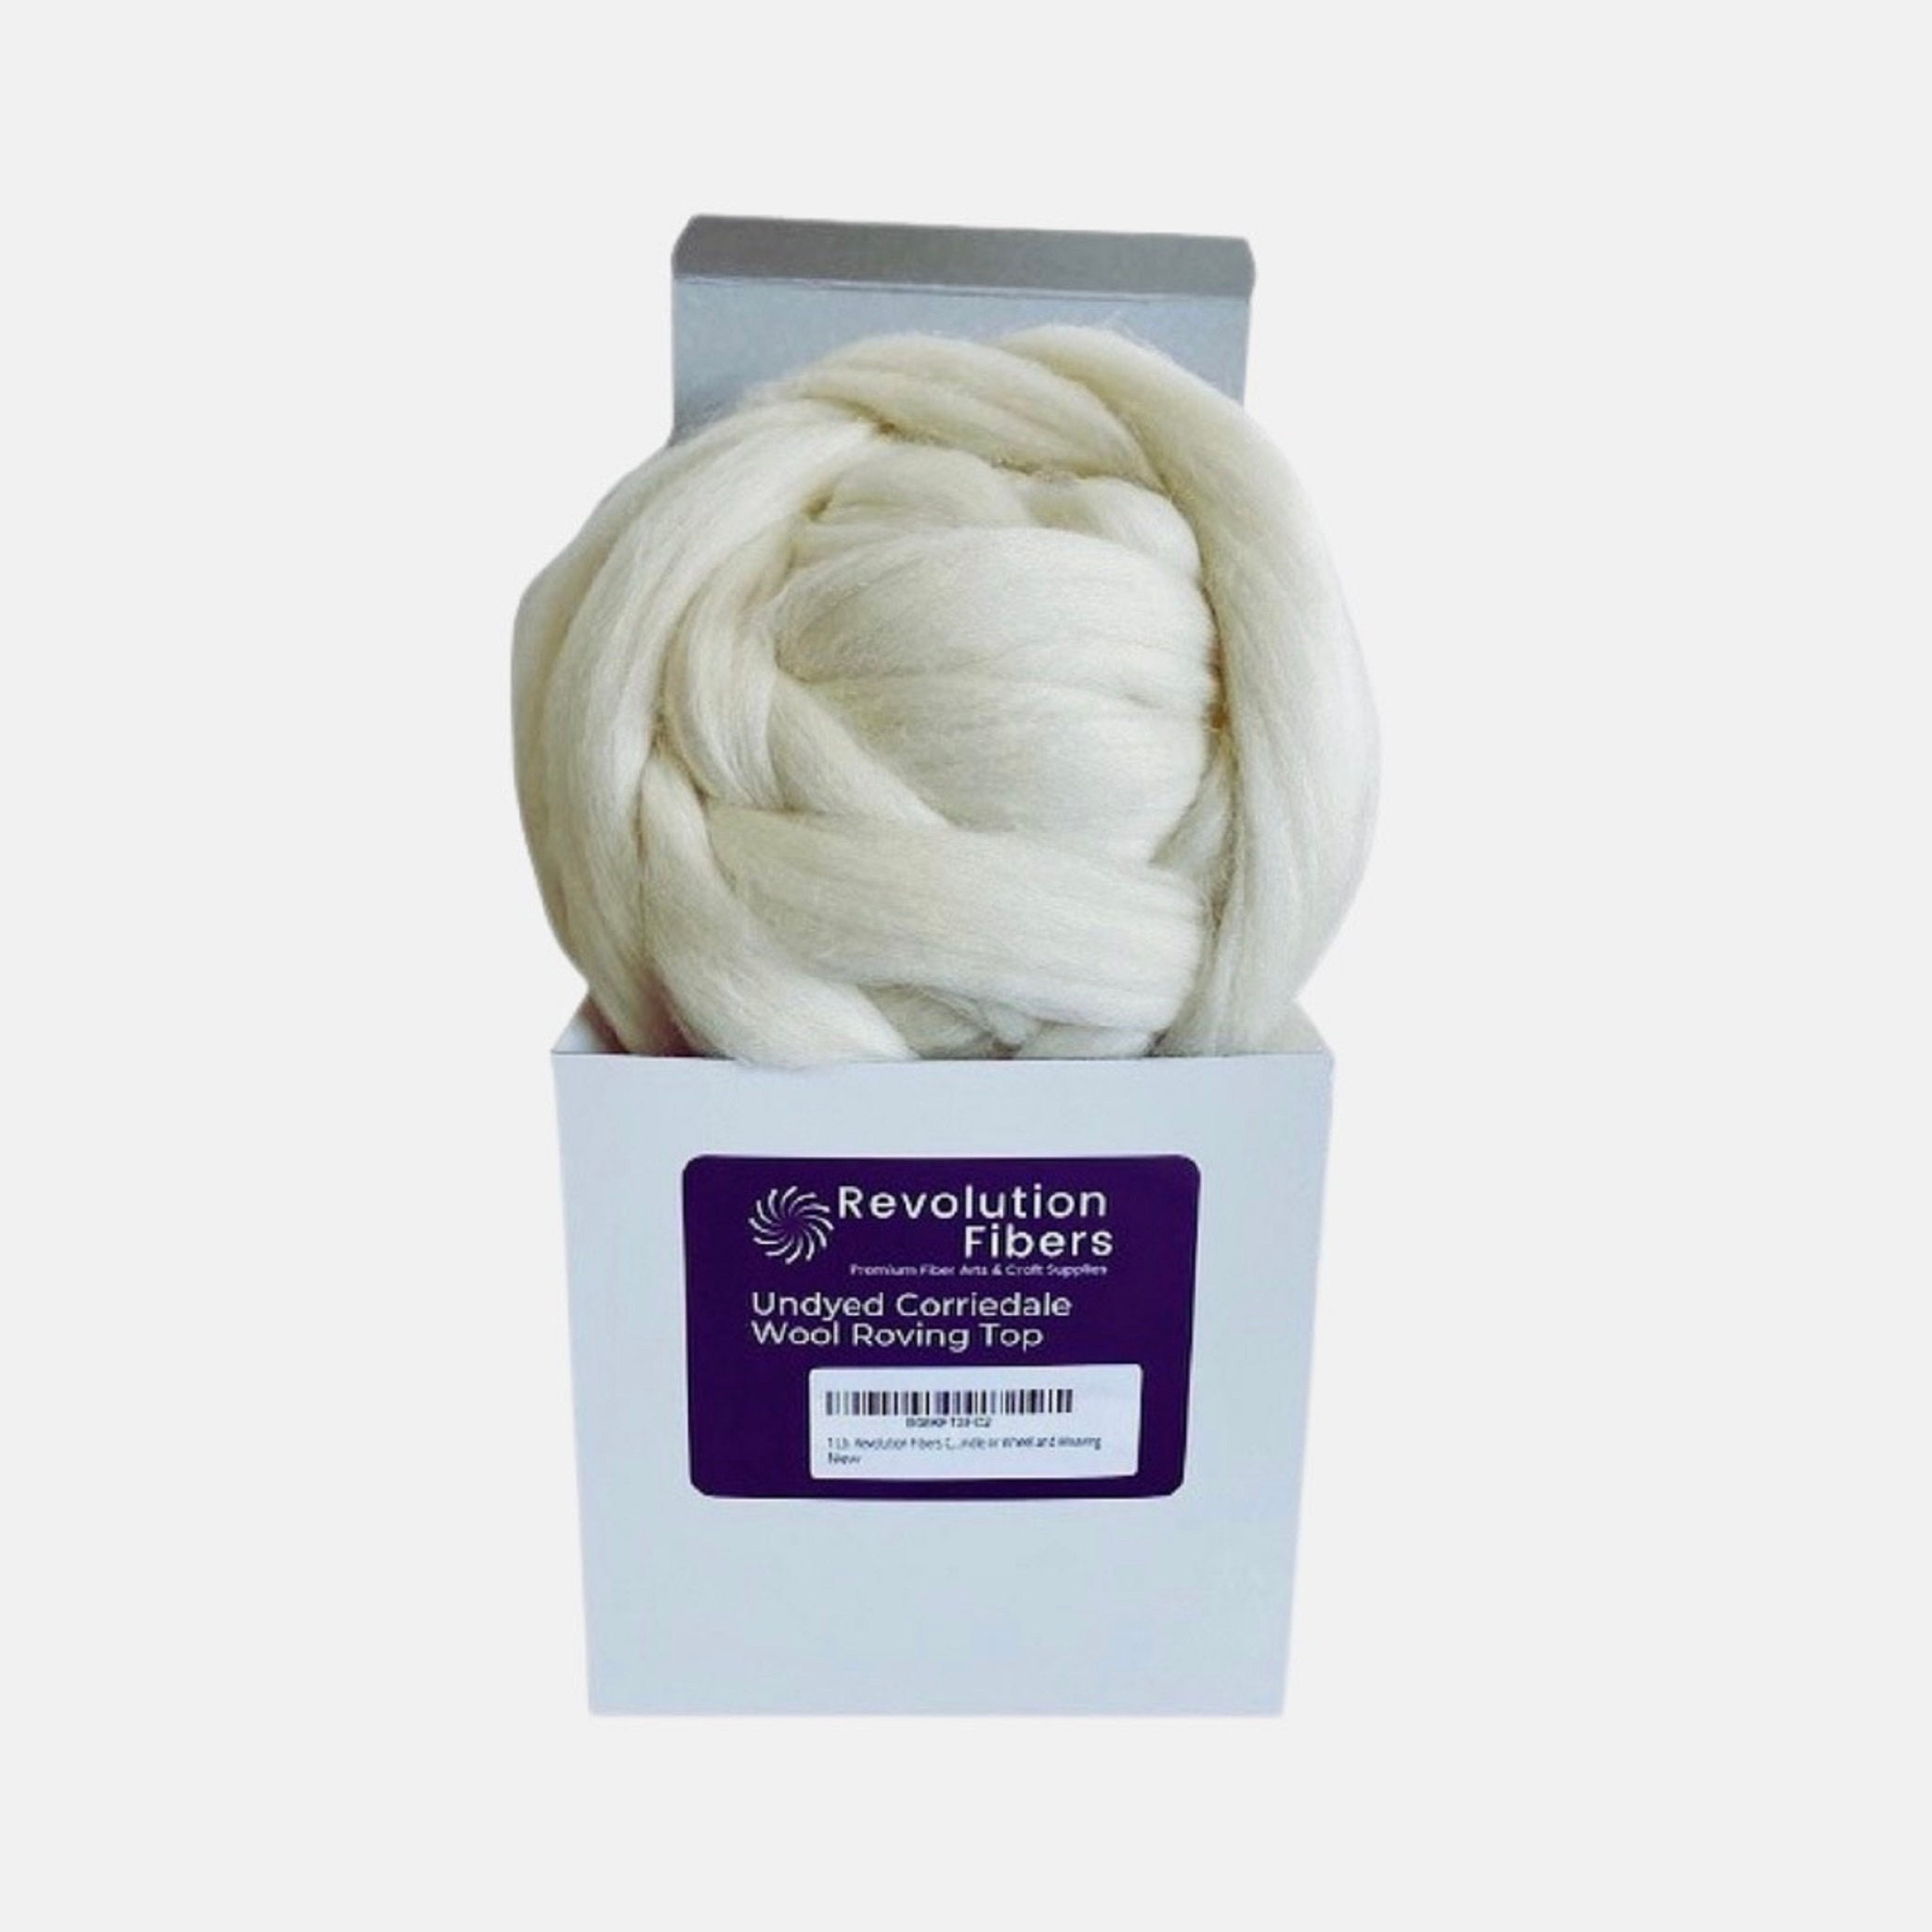 Revolution Fibers 100% Natural Wool Roving approx 1 Lb / 16oz Corriedale  Spinning Wool Top, Premium Core Wool for Felting & Spinning -  Australia